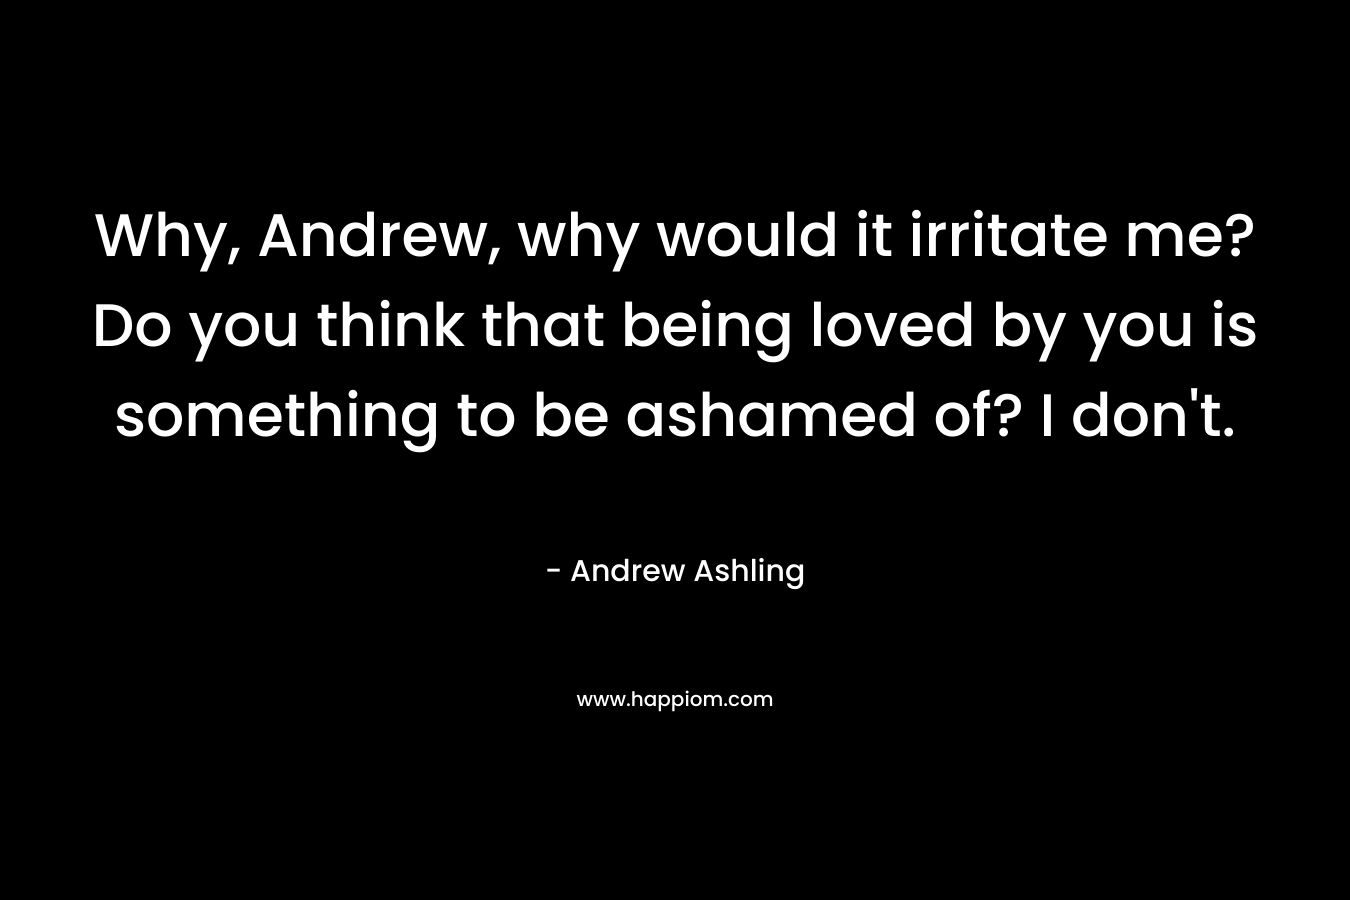 Why, Andrew, why would it irritate me? Do you think that being loved by you is something to be ashamed of? I don't.